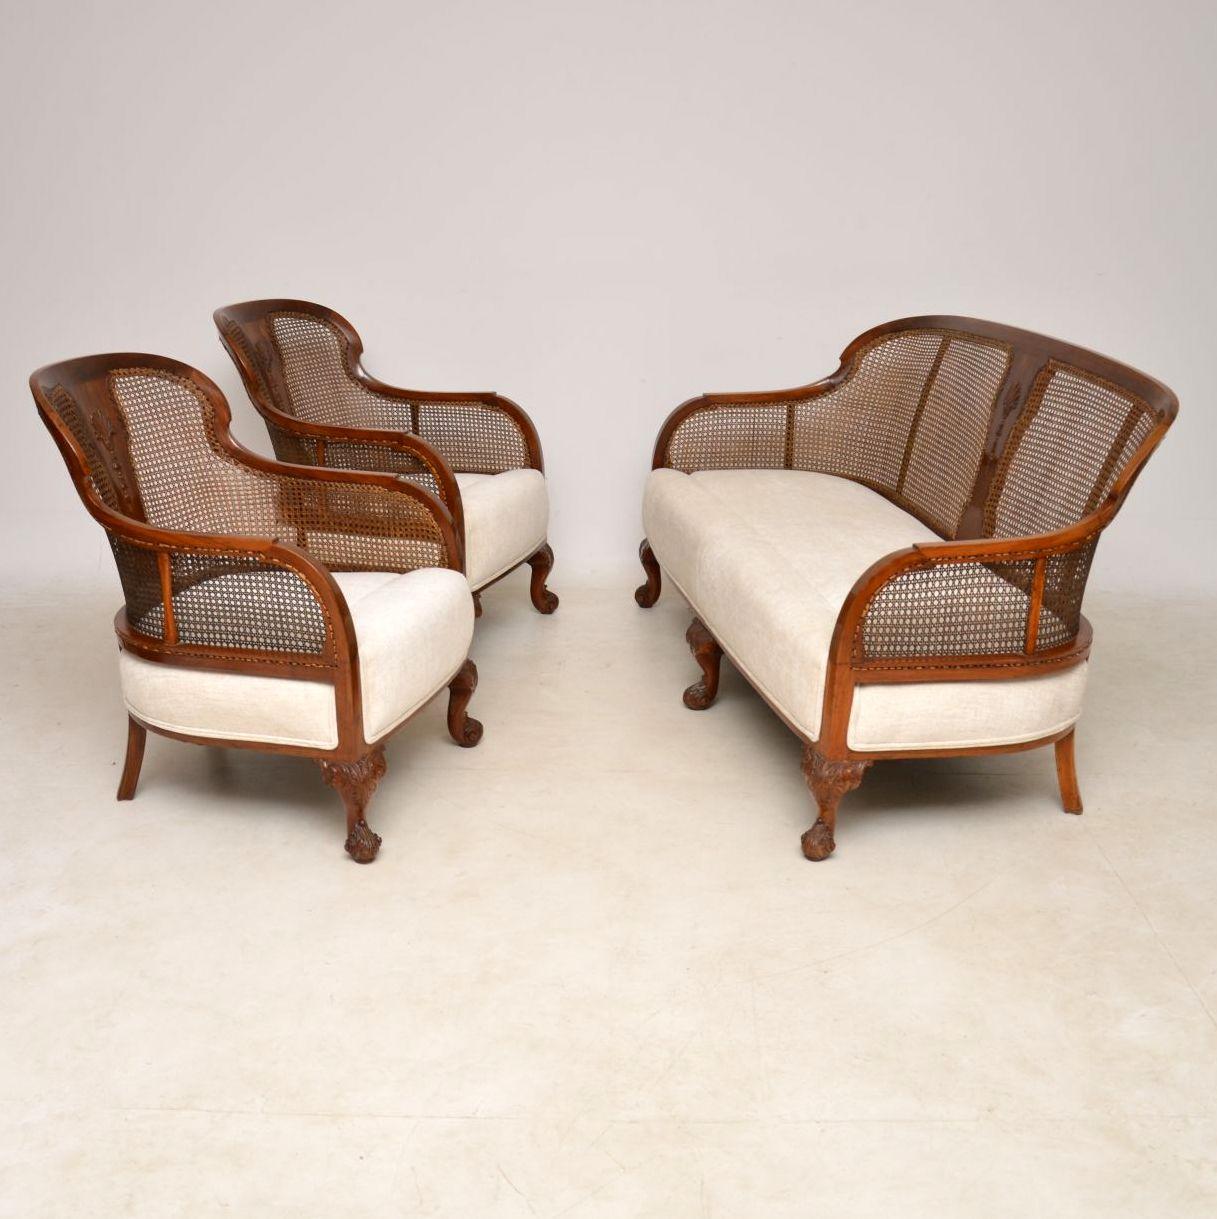 Antique Bergere three-piece lounge suite, consisting of a sofa and two armchairs. The frames are solid walnut with cane panels. It's all been polished and re-upholstered, so is in excellent condition. We have only had the seats re-upholstered, but